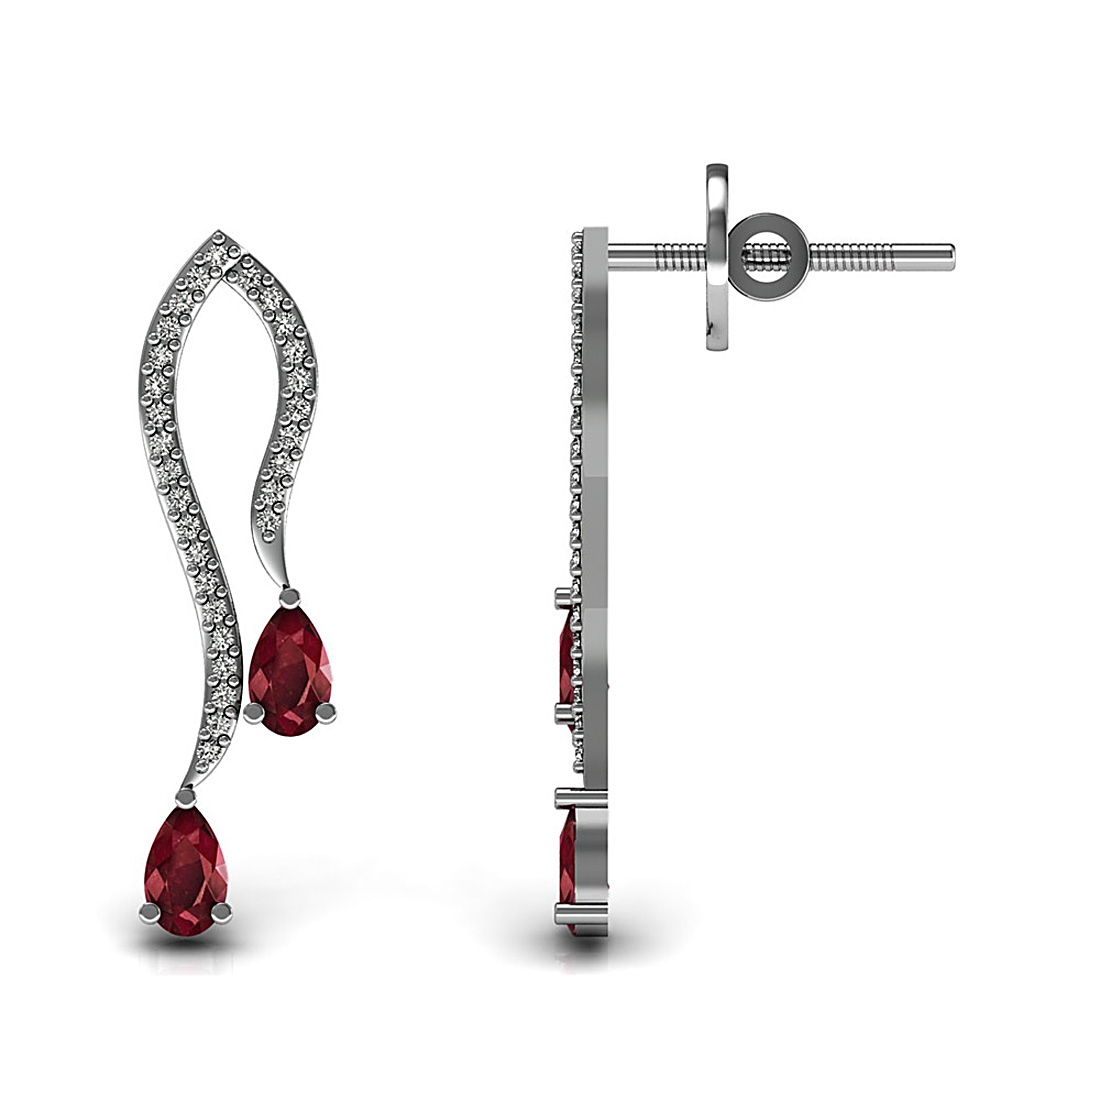 Natural ruby gemstone designer stud earrings made in 18k solid white gold adorned with real diamond.